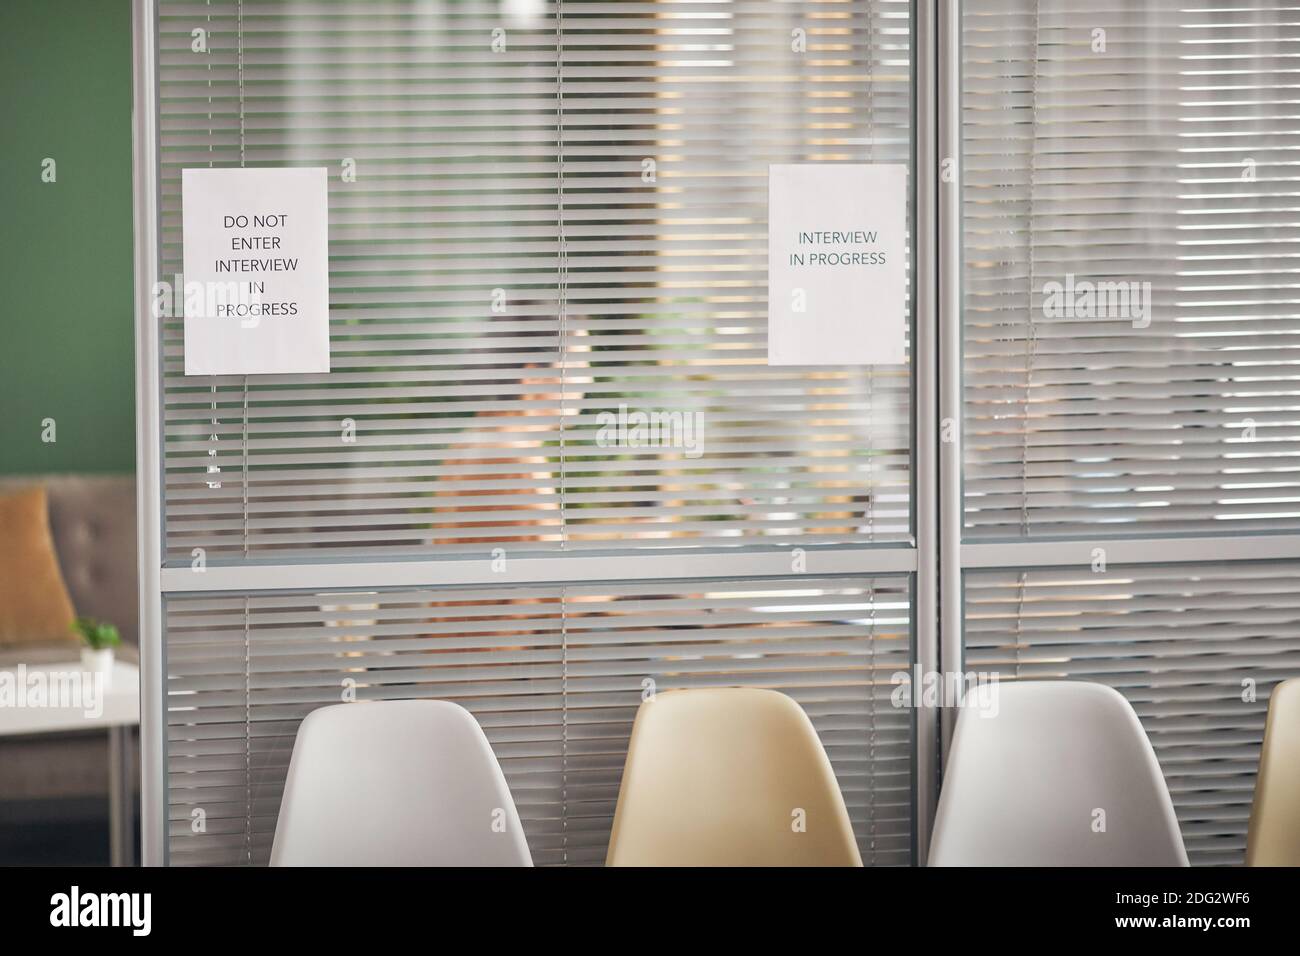 Background image of office room with sign Interview in progress on glass  wall and silhouettes of people, copy space Stock Photo - Alamy